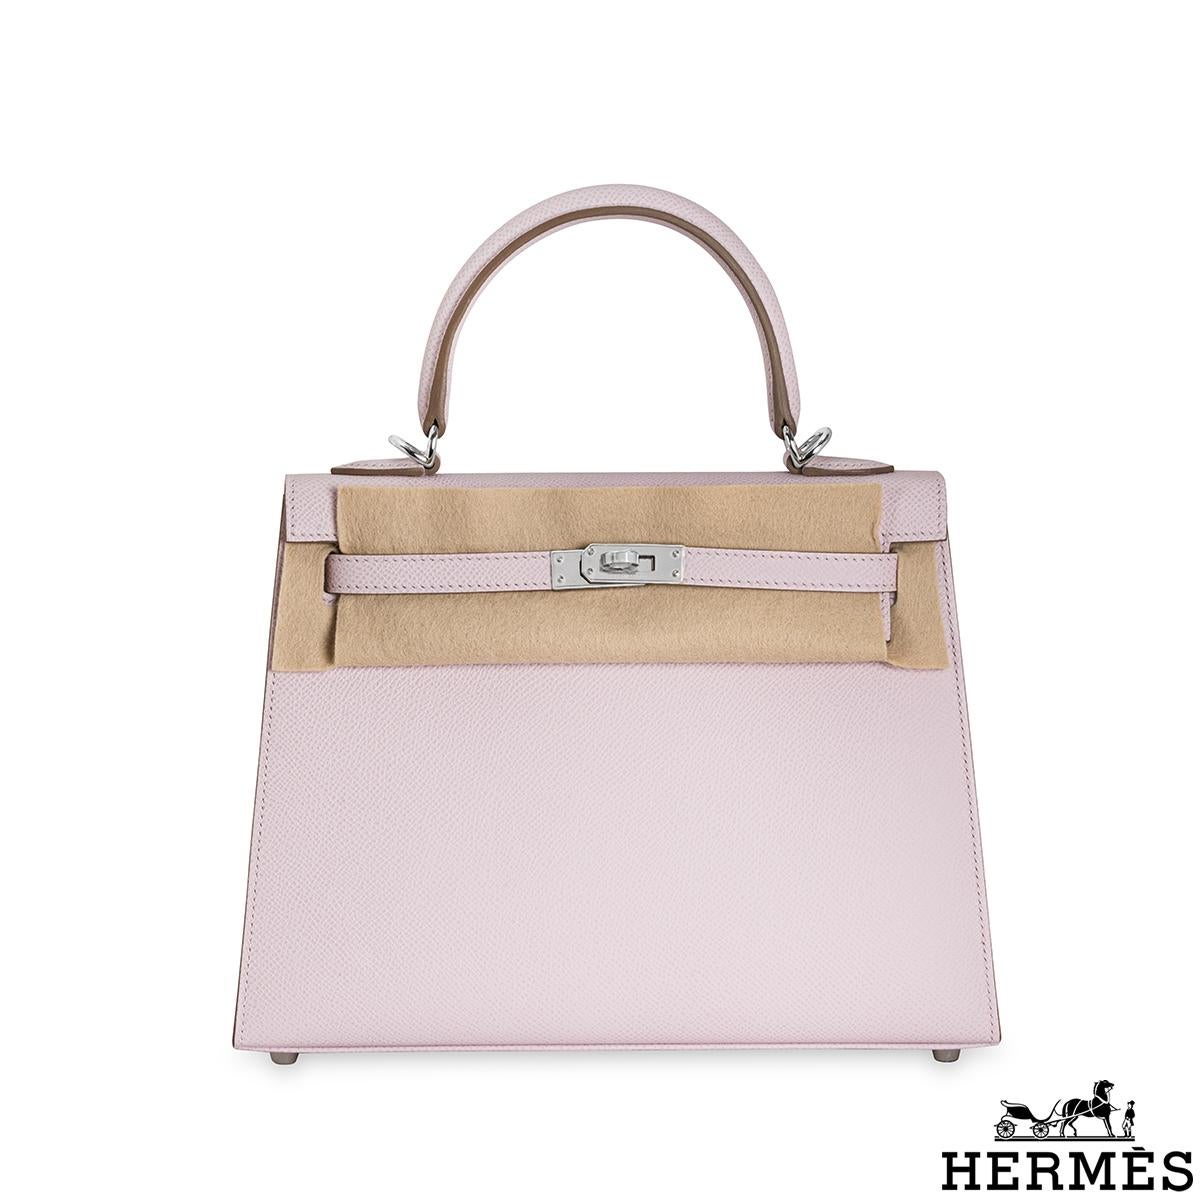 A gorgeous Hermès 25cm Kelly bag. The exterior of this Kelly features a Sellier style in Mauve Pale Veau Epsom leather. The Mauve Pale Epsom leather is complemented with palladium hardware and tonal stitchings. It features a front toggle closure